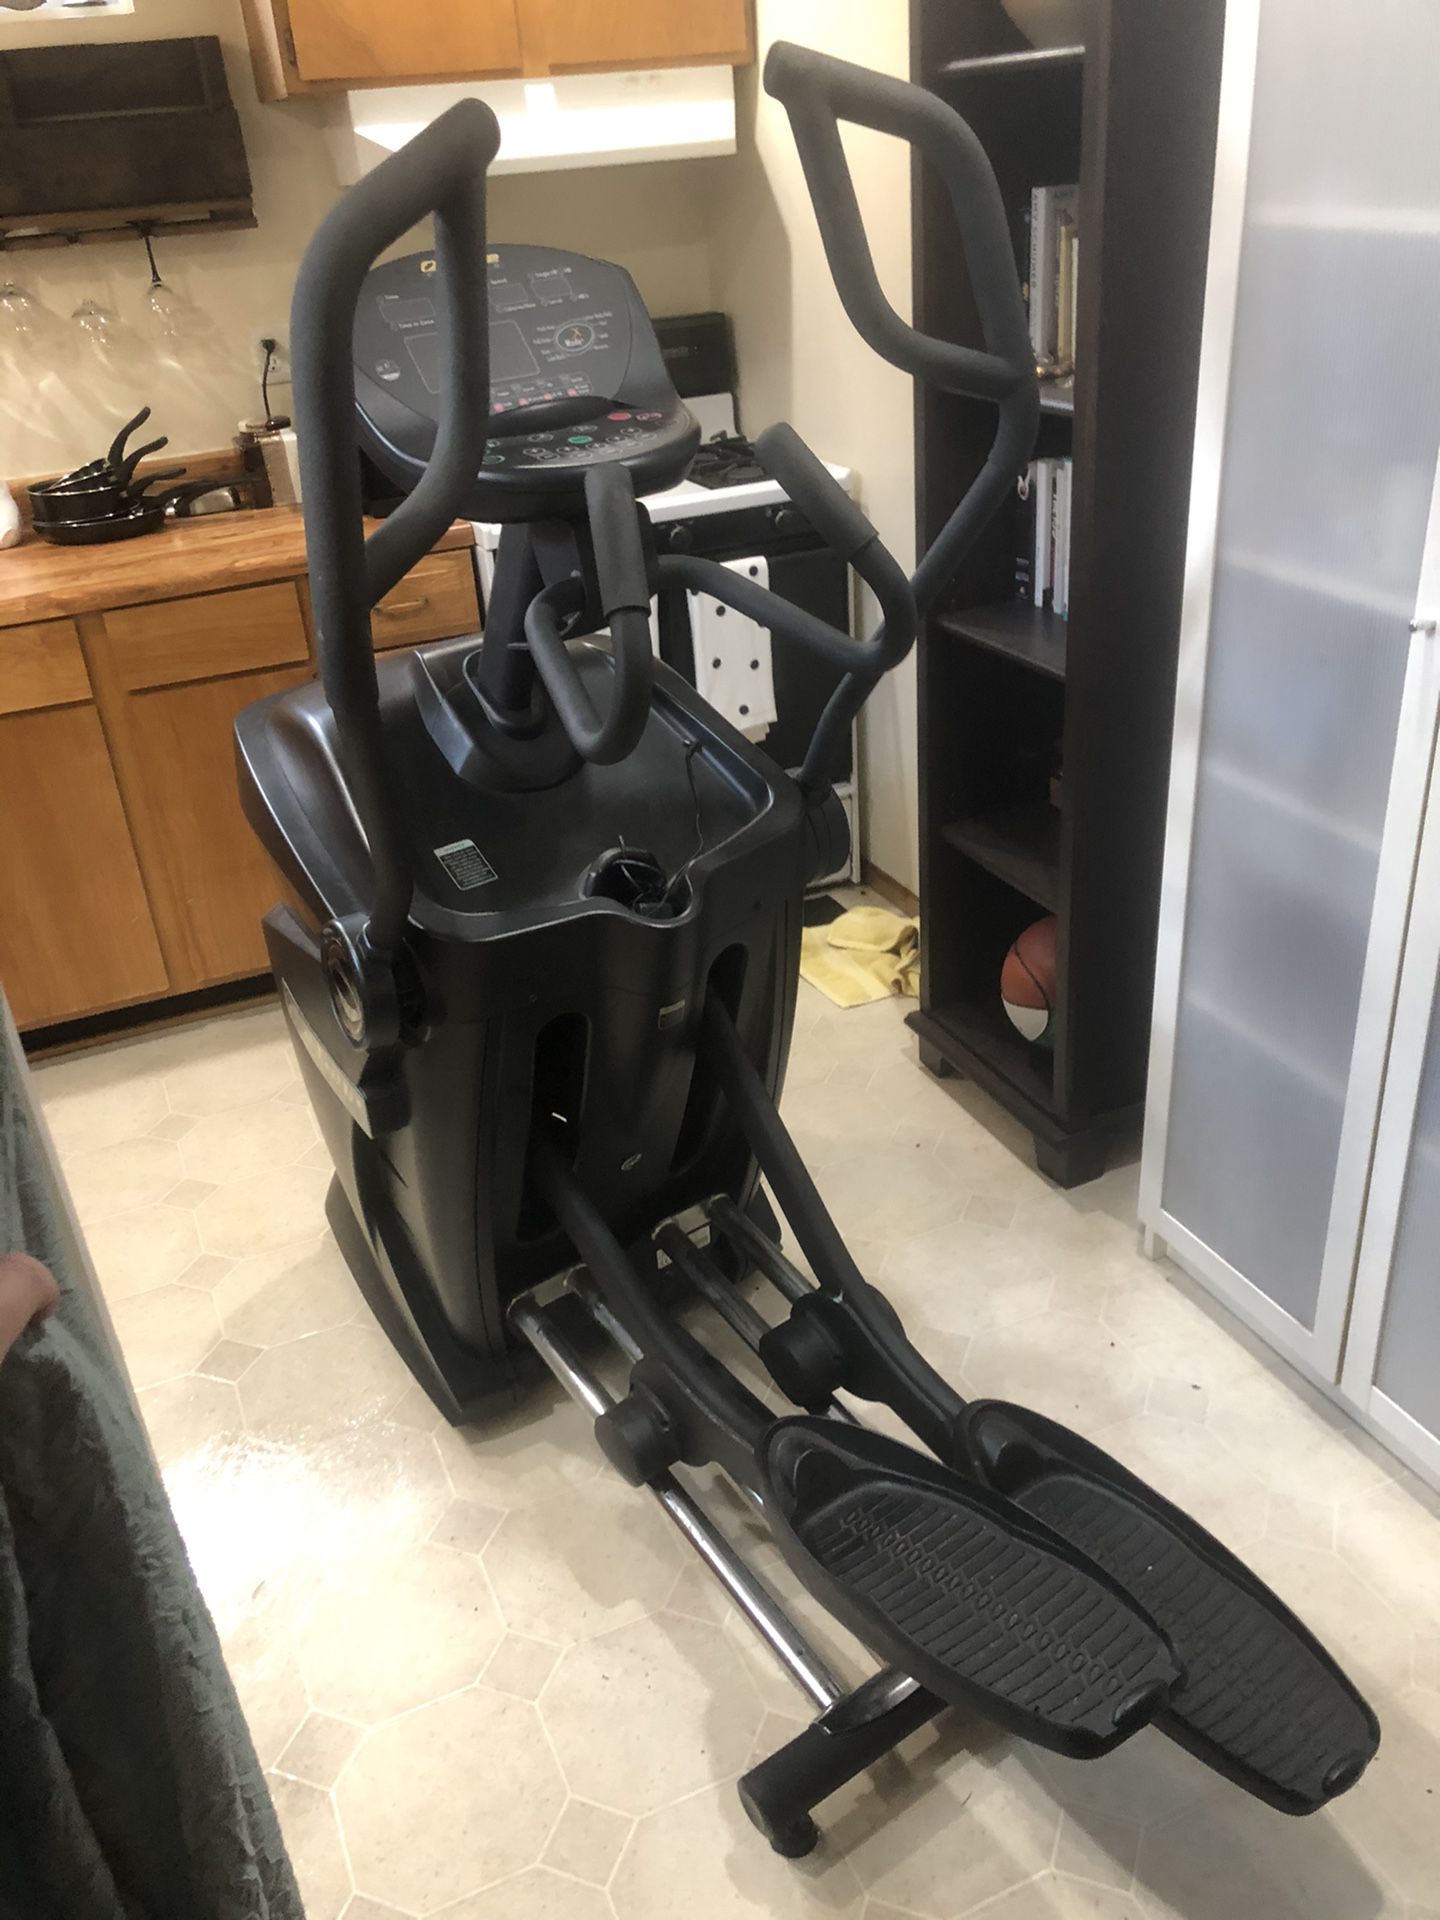 Octane gym grade elliptical...good condition, all power functions work. $300